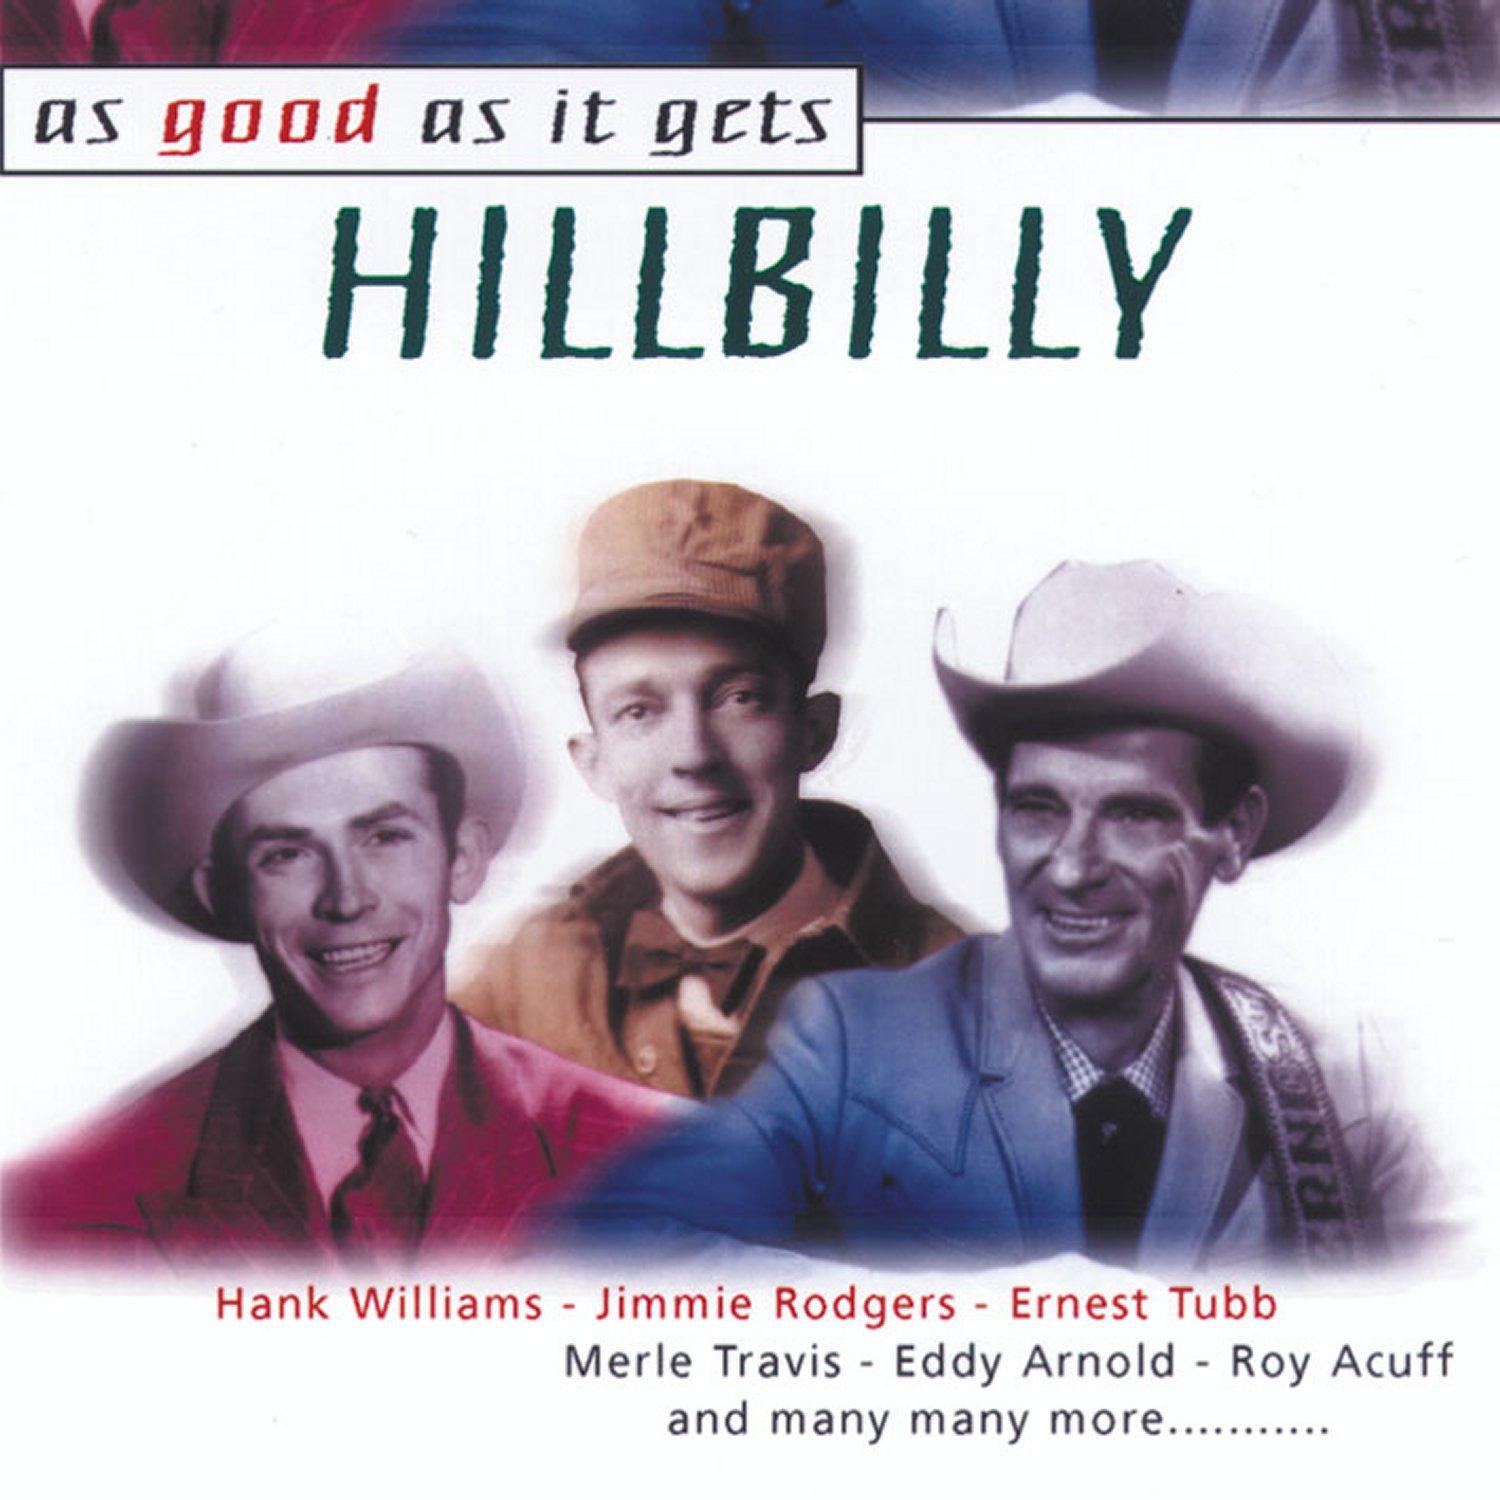 As Good as It Gets: Hillbilly